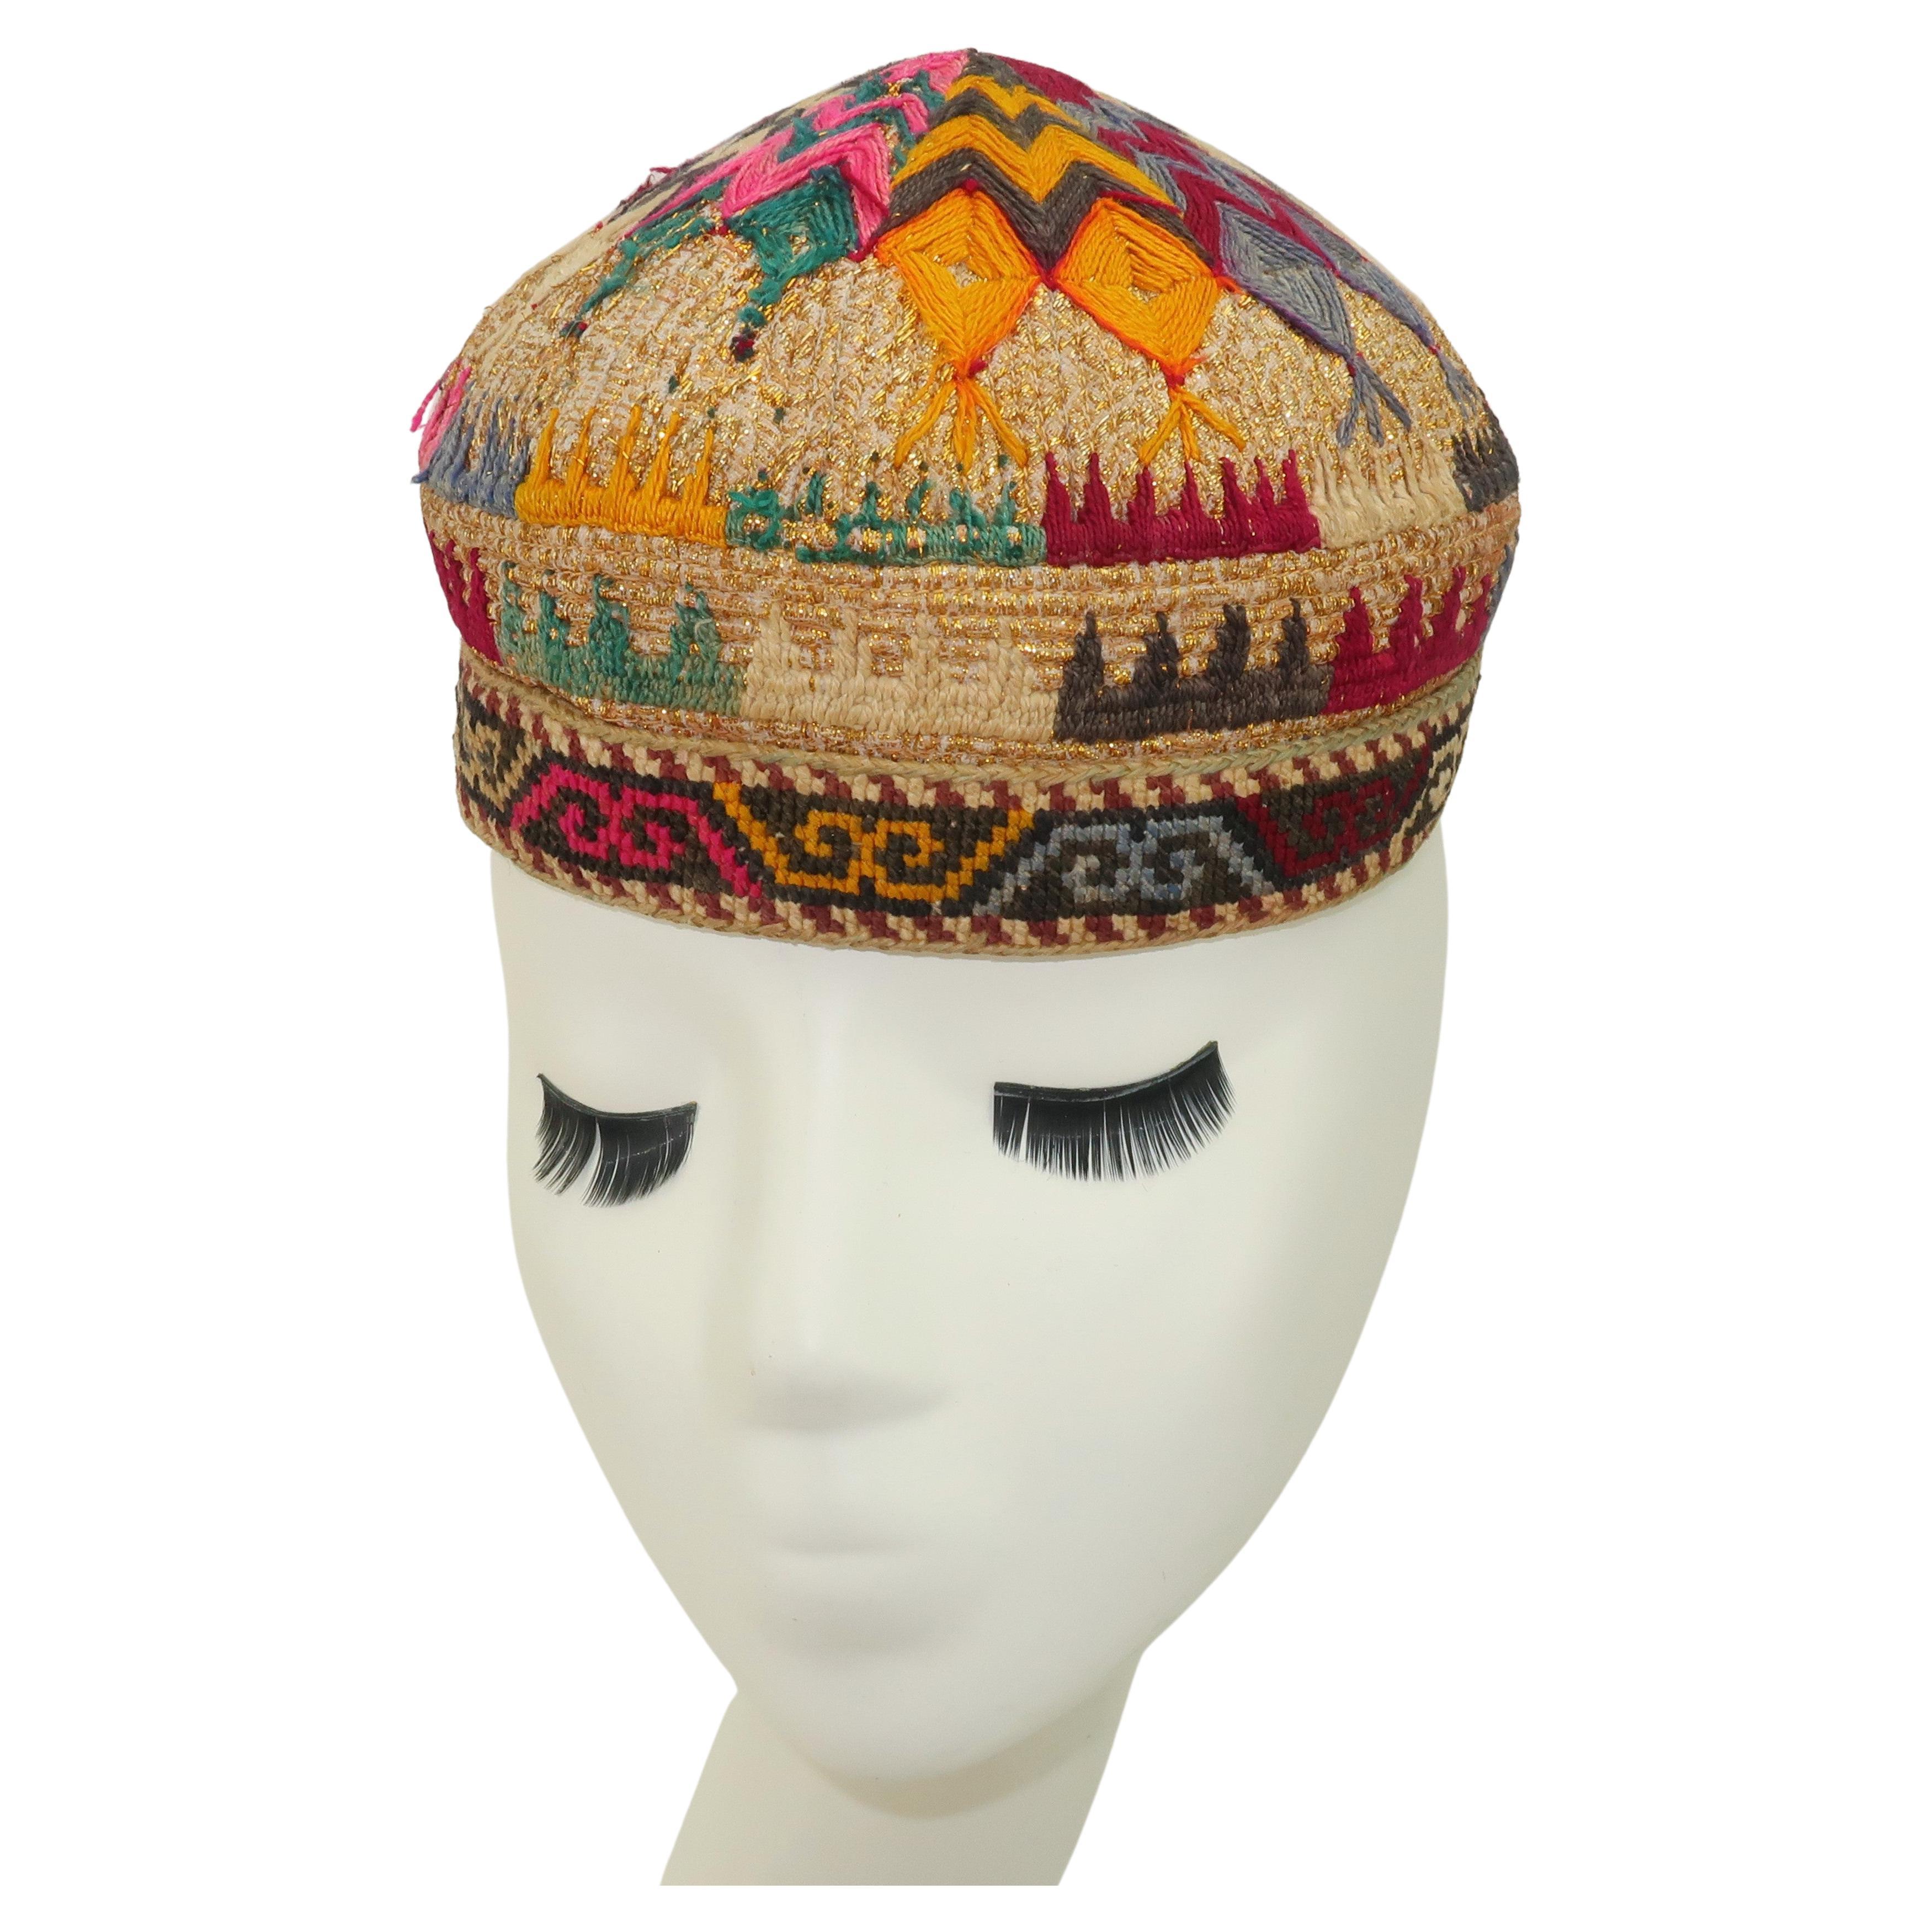 Early 20th Century Colorful Central Asian Embroidered Hat For Sale